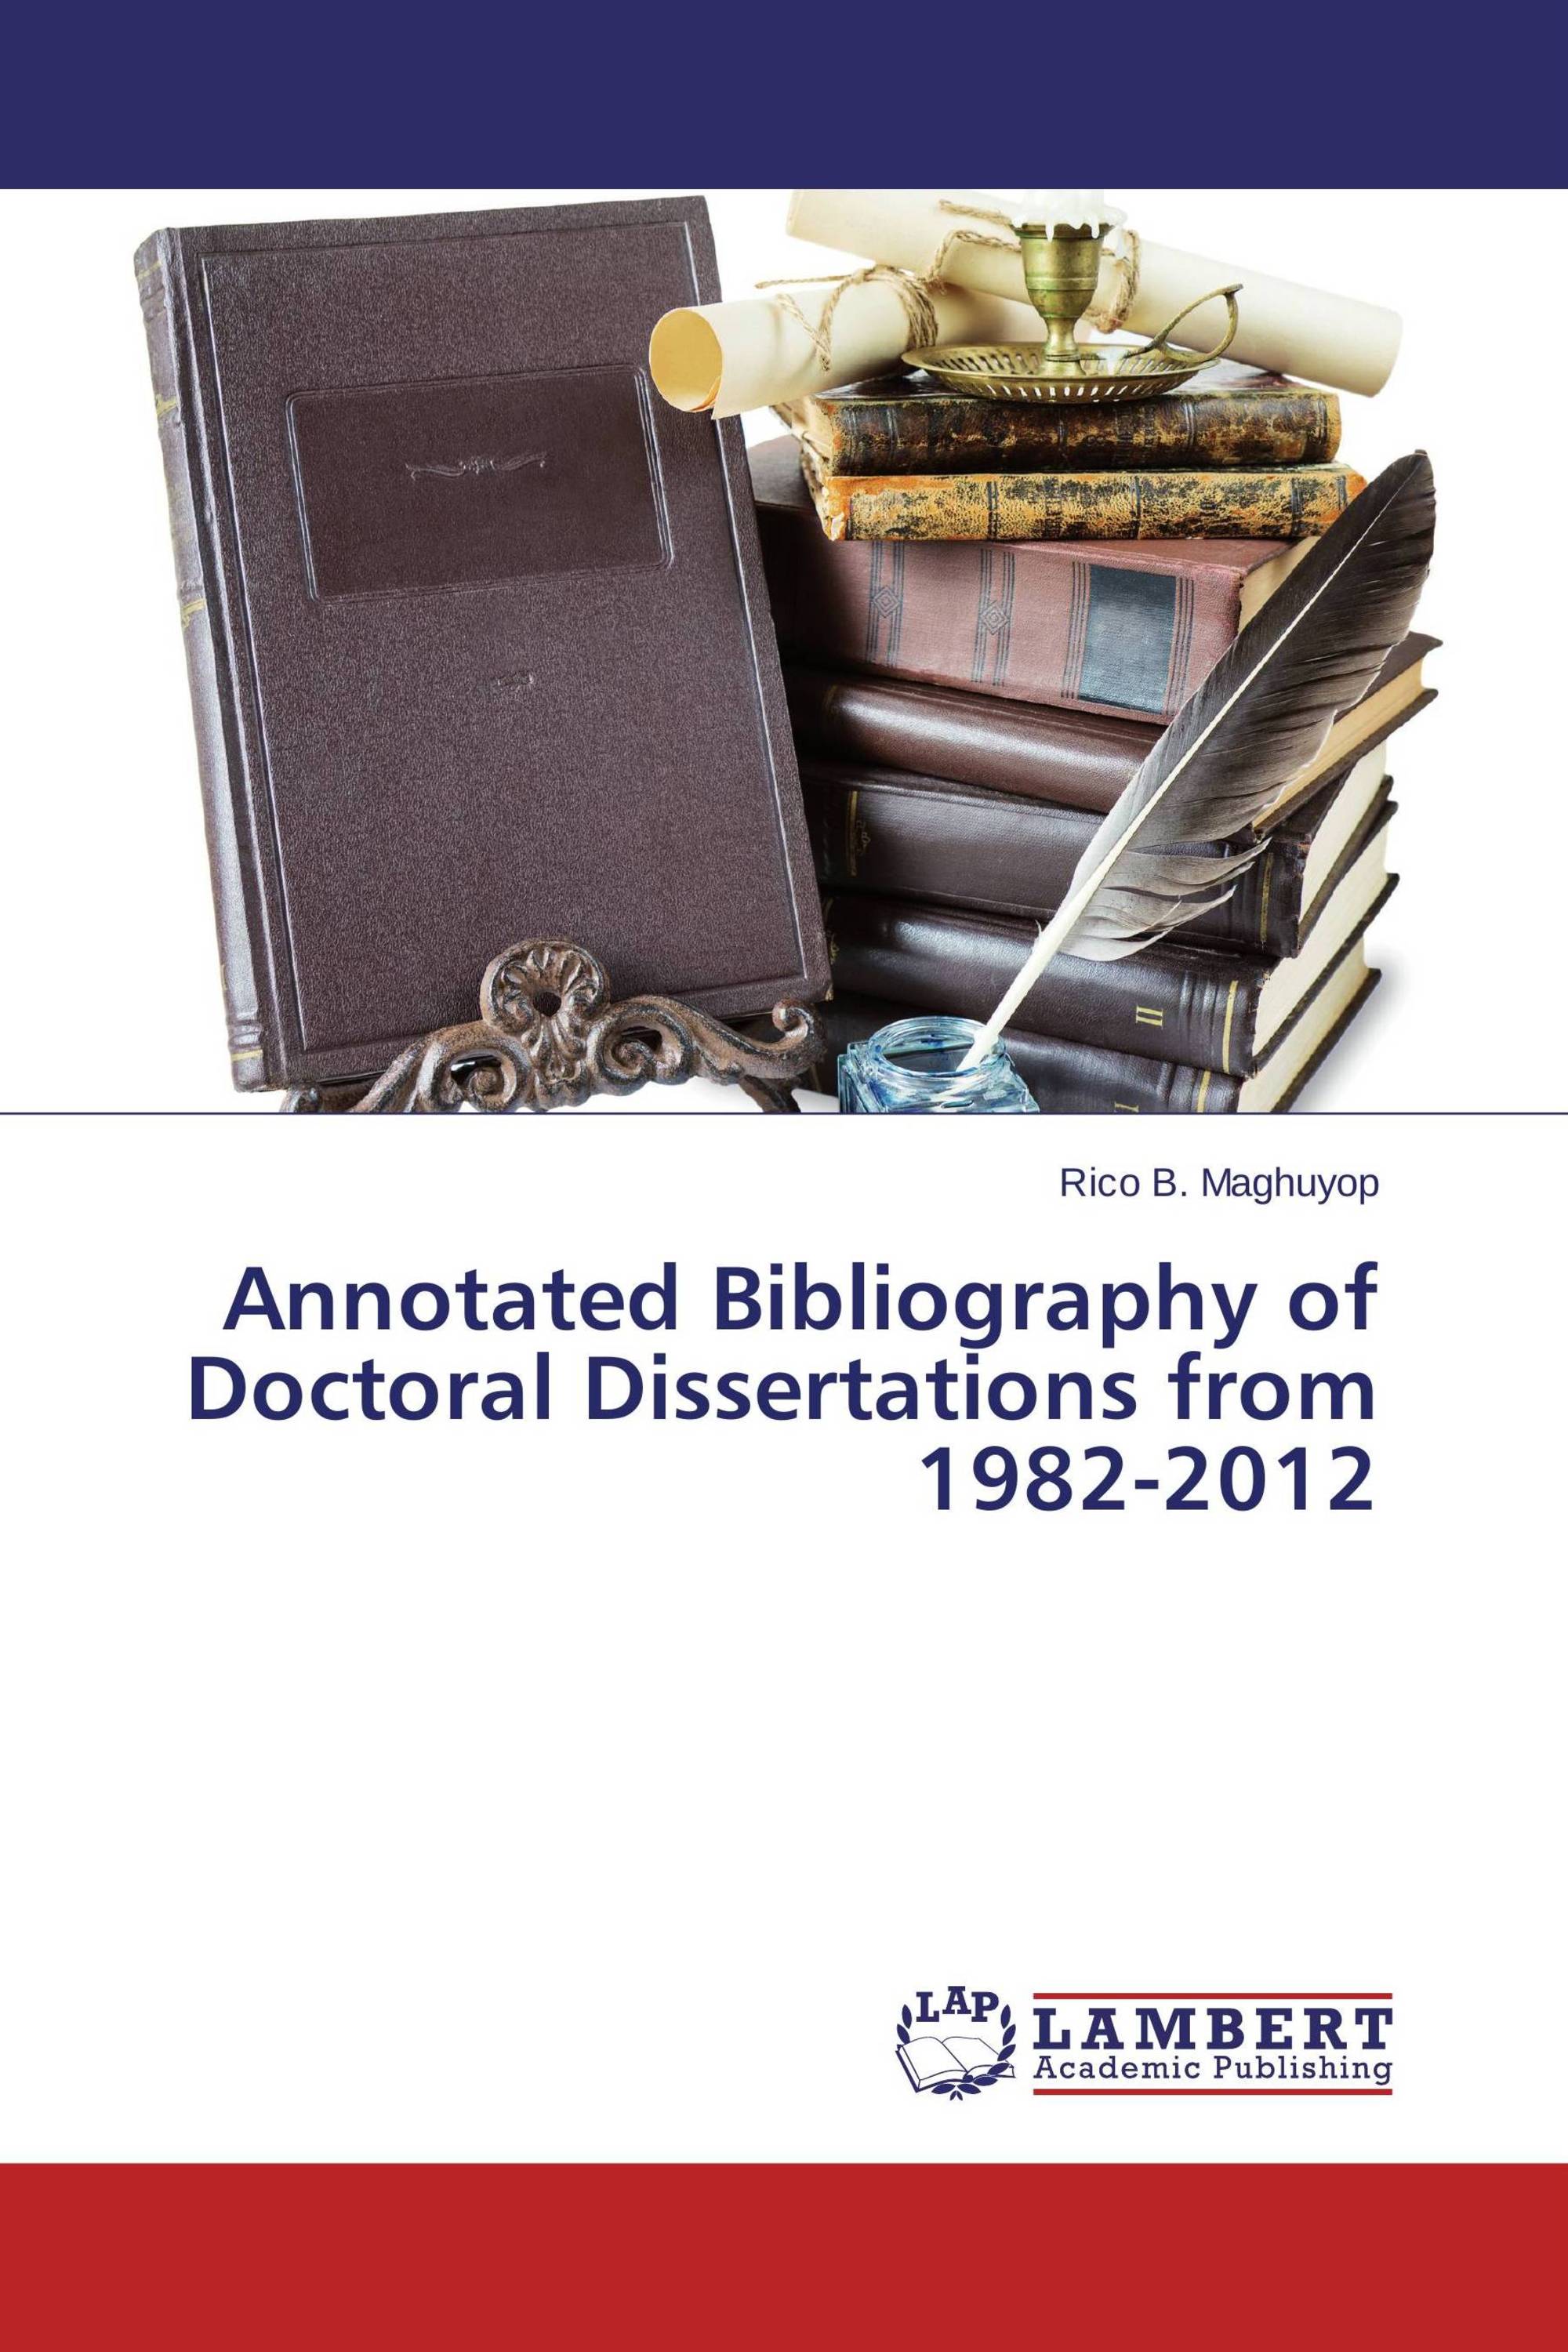 how to find doctoral dissertations